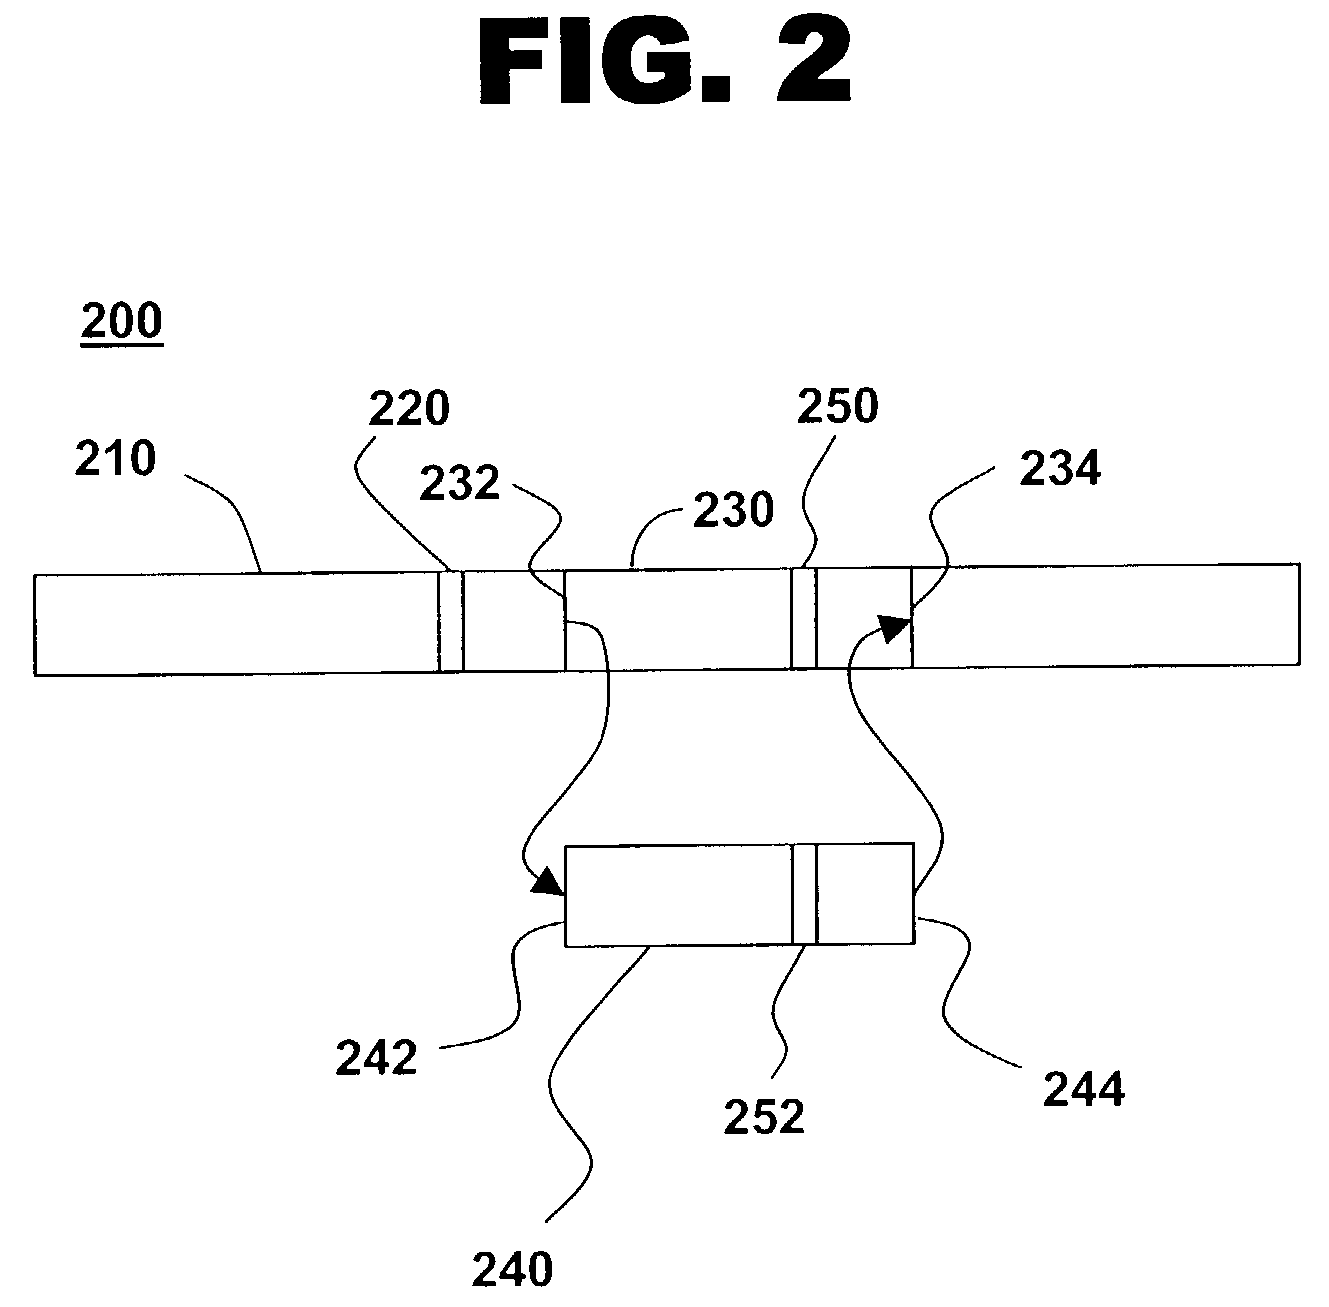 Offensive material control method for digital transmissions